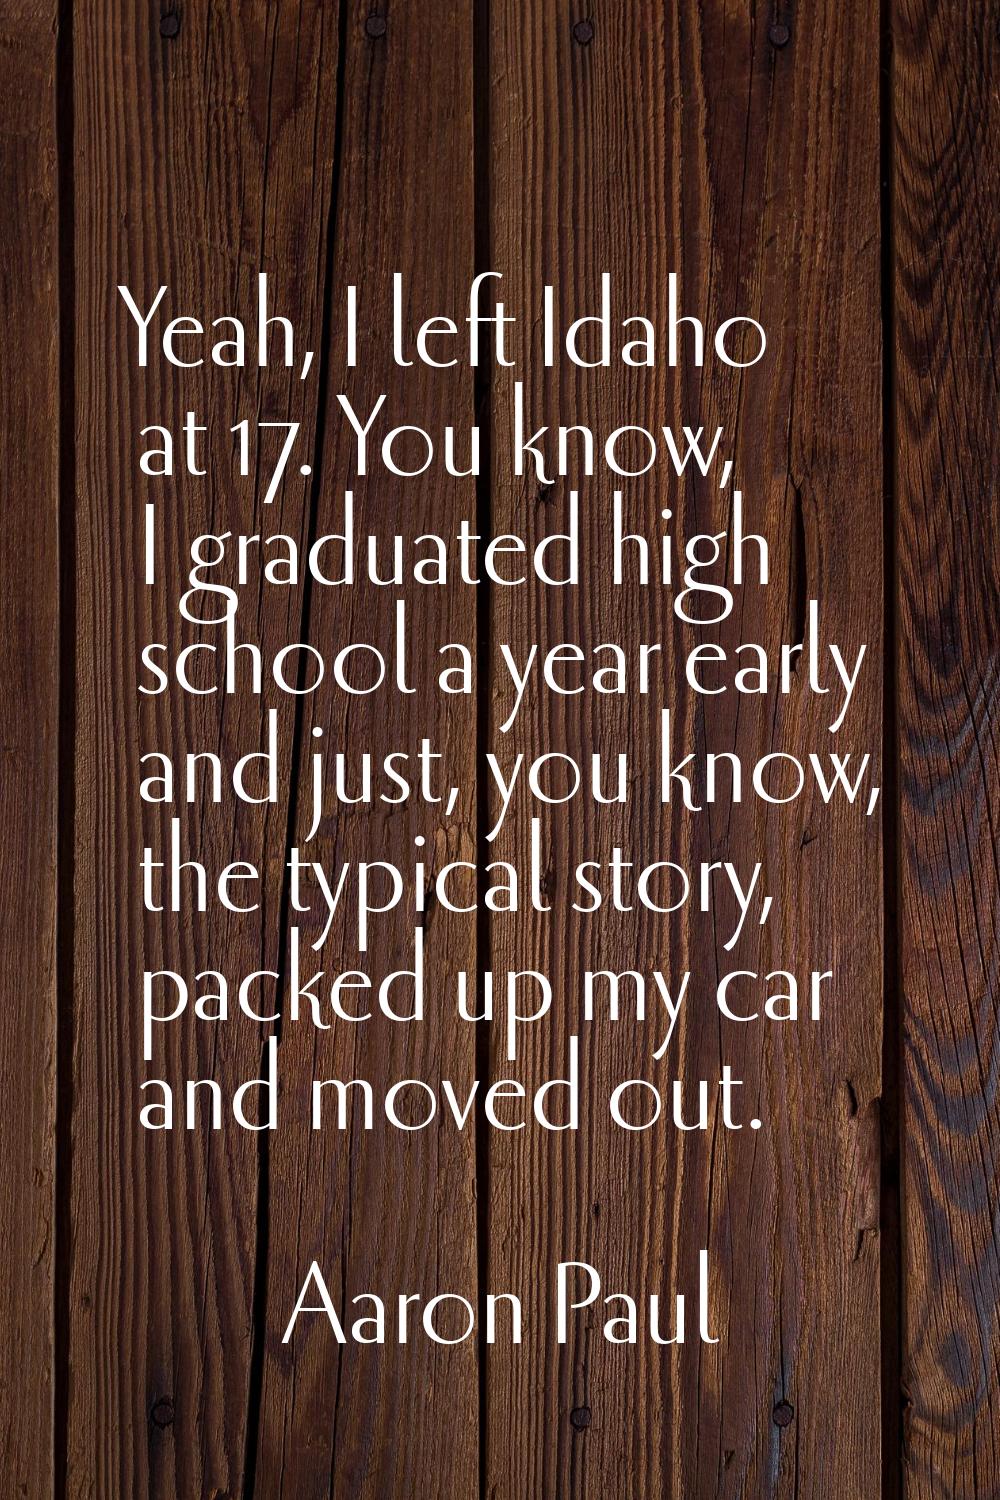 Yeah, I left Idaho at 17. You know, I graduated high school a year early and just, you know, the ty